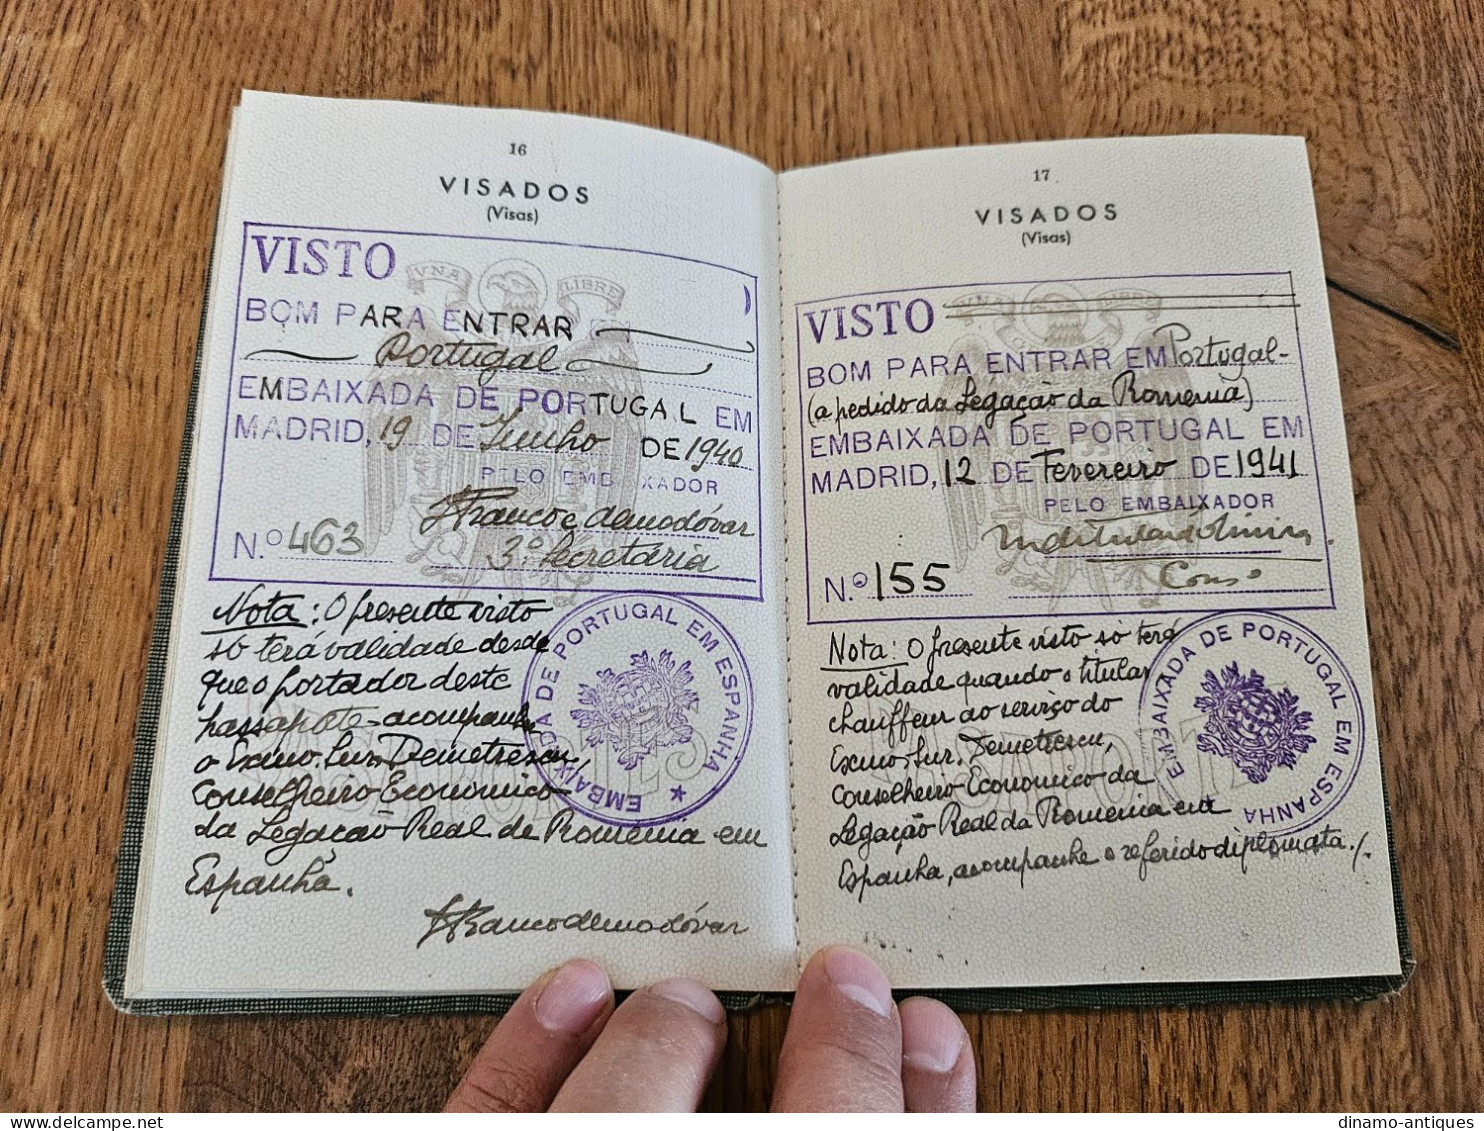 1940 Spain passport passeport issued in Madrid for a driver of Romania embassy in Spain travel to Portugal - Transporter